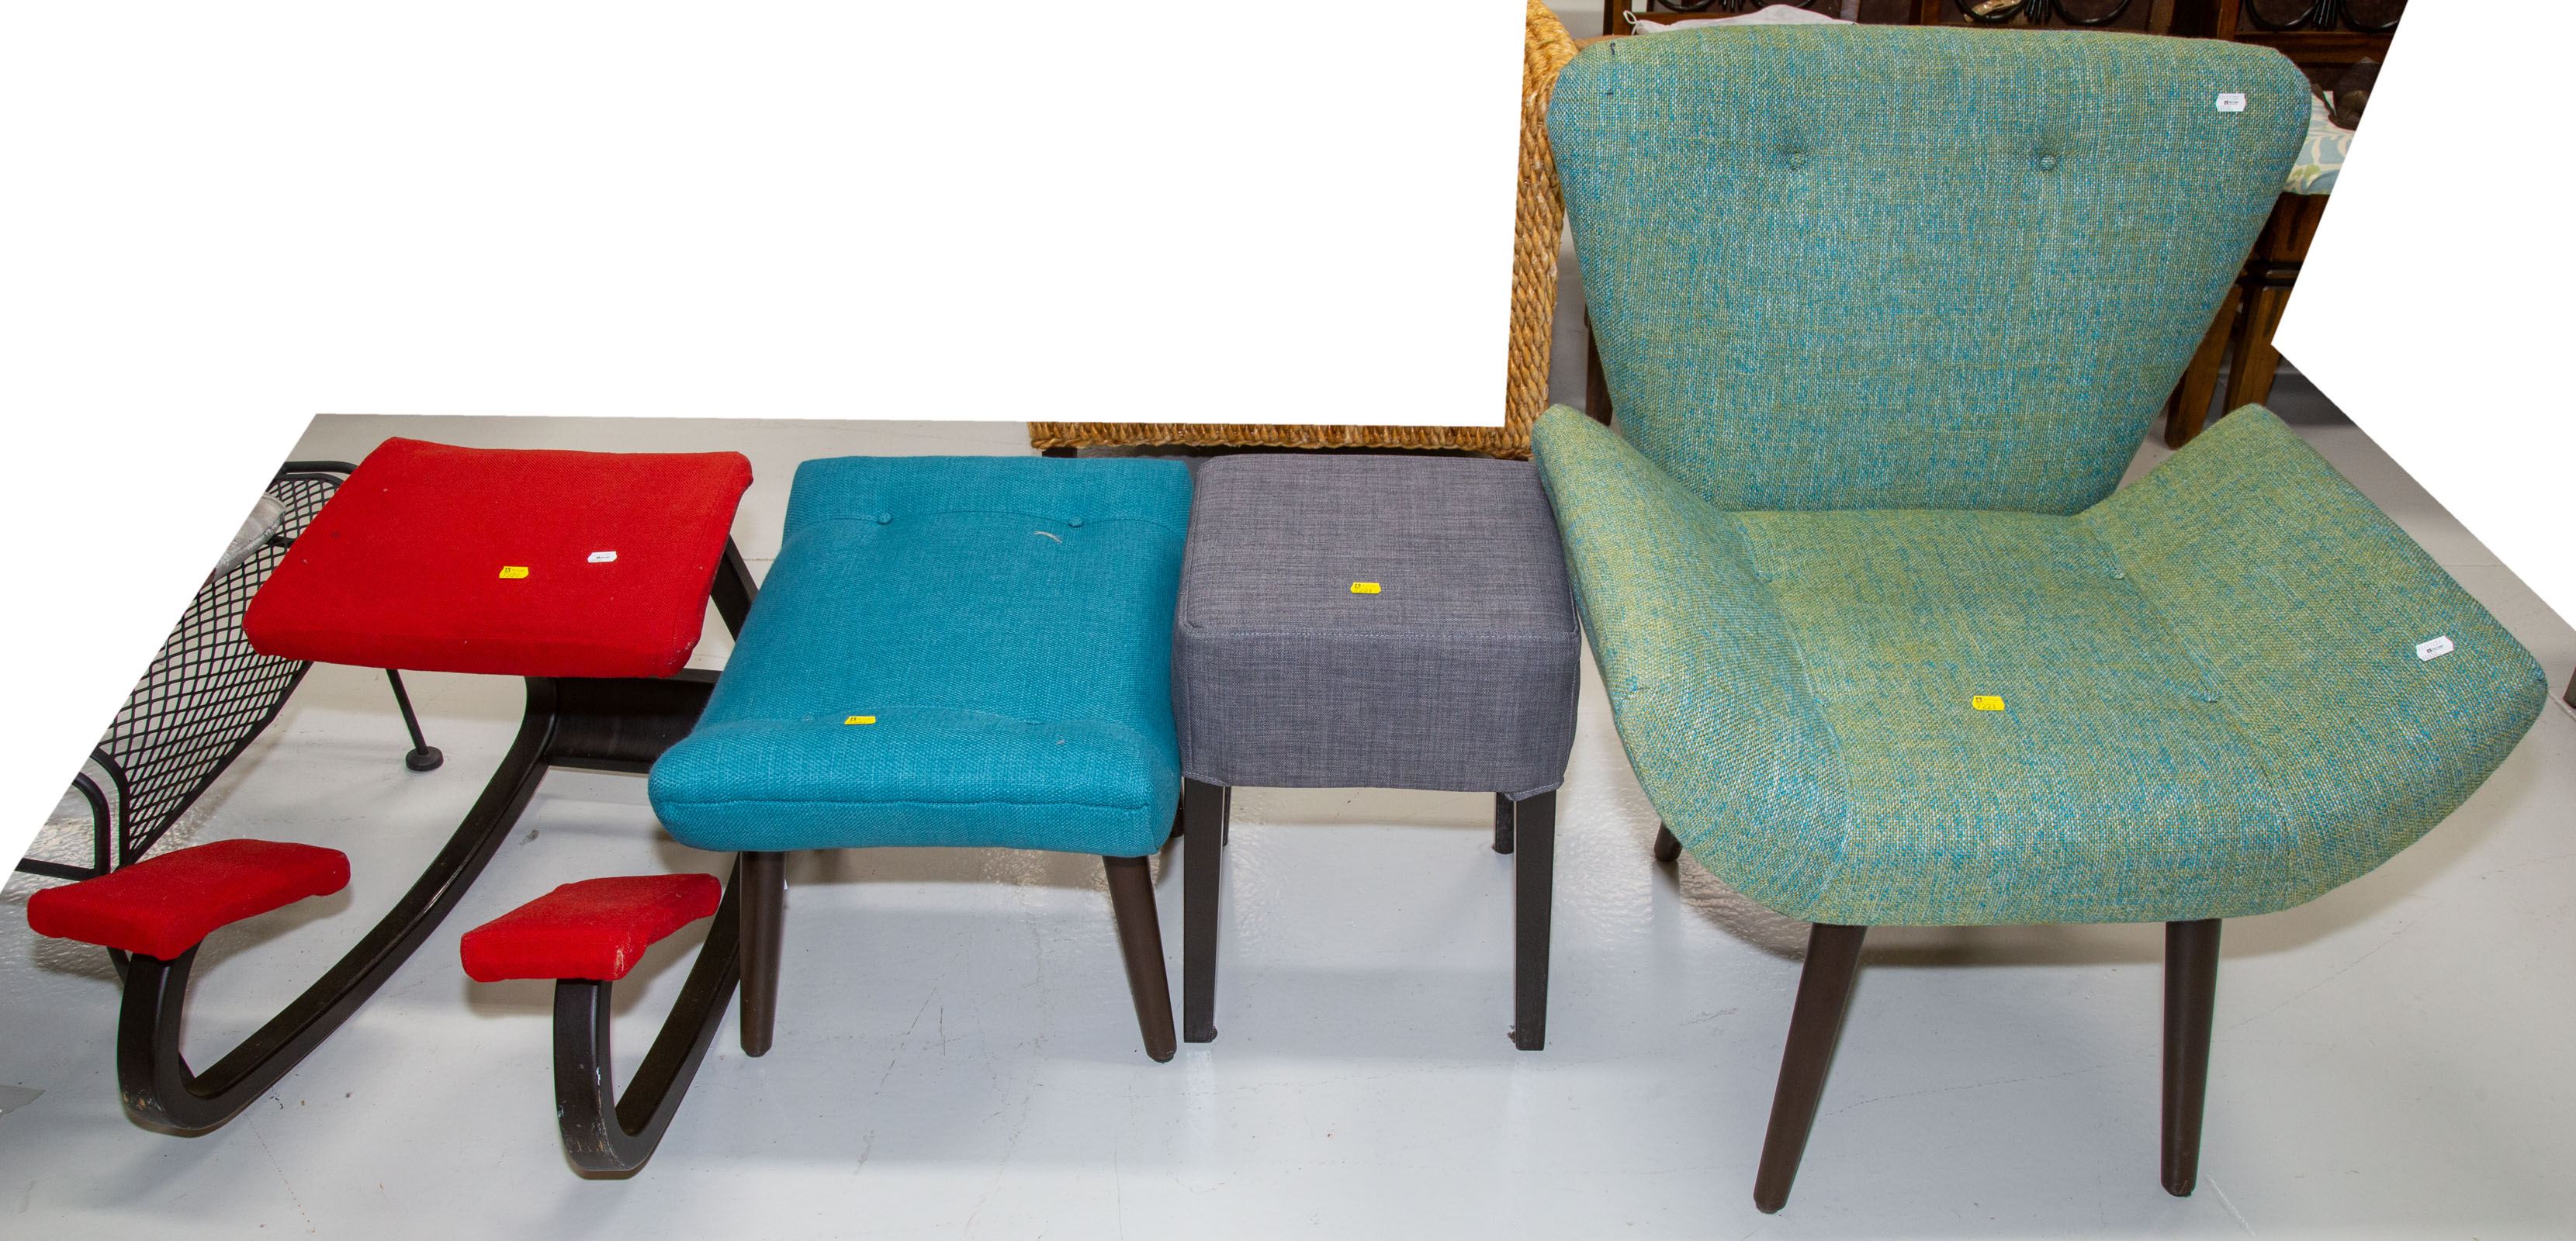 FOUR PIECES OF MID-CENTURY MODERN